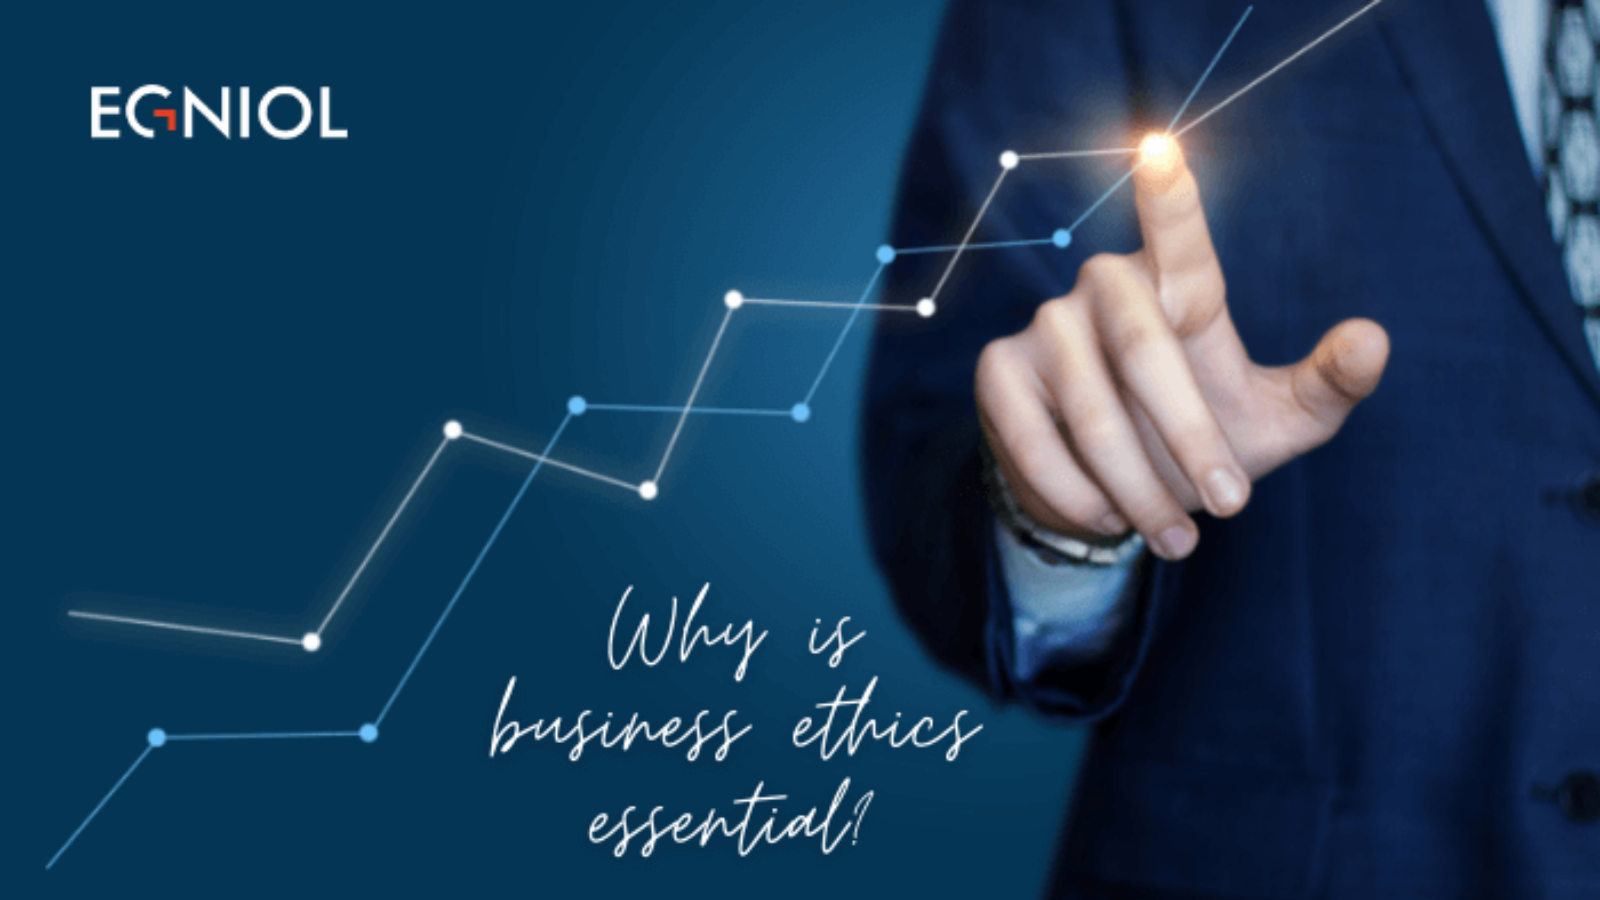 Why is business ethics essential? - By Egniol